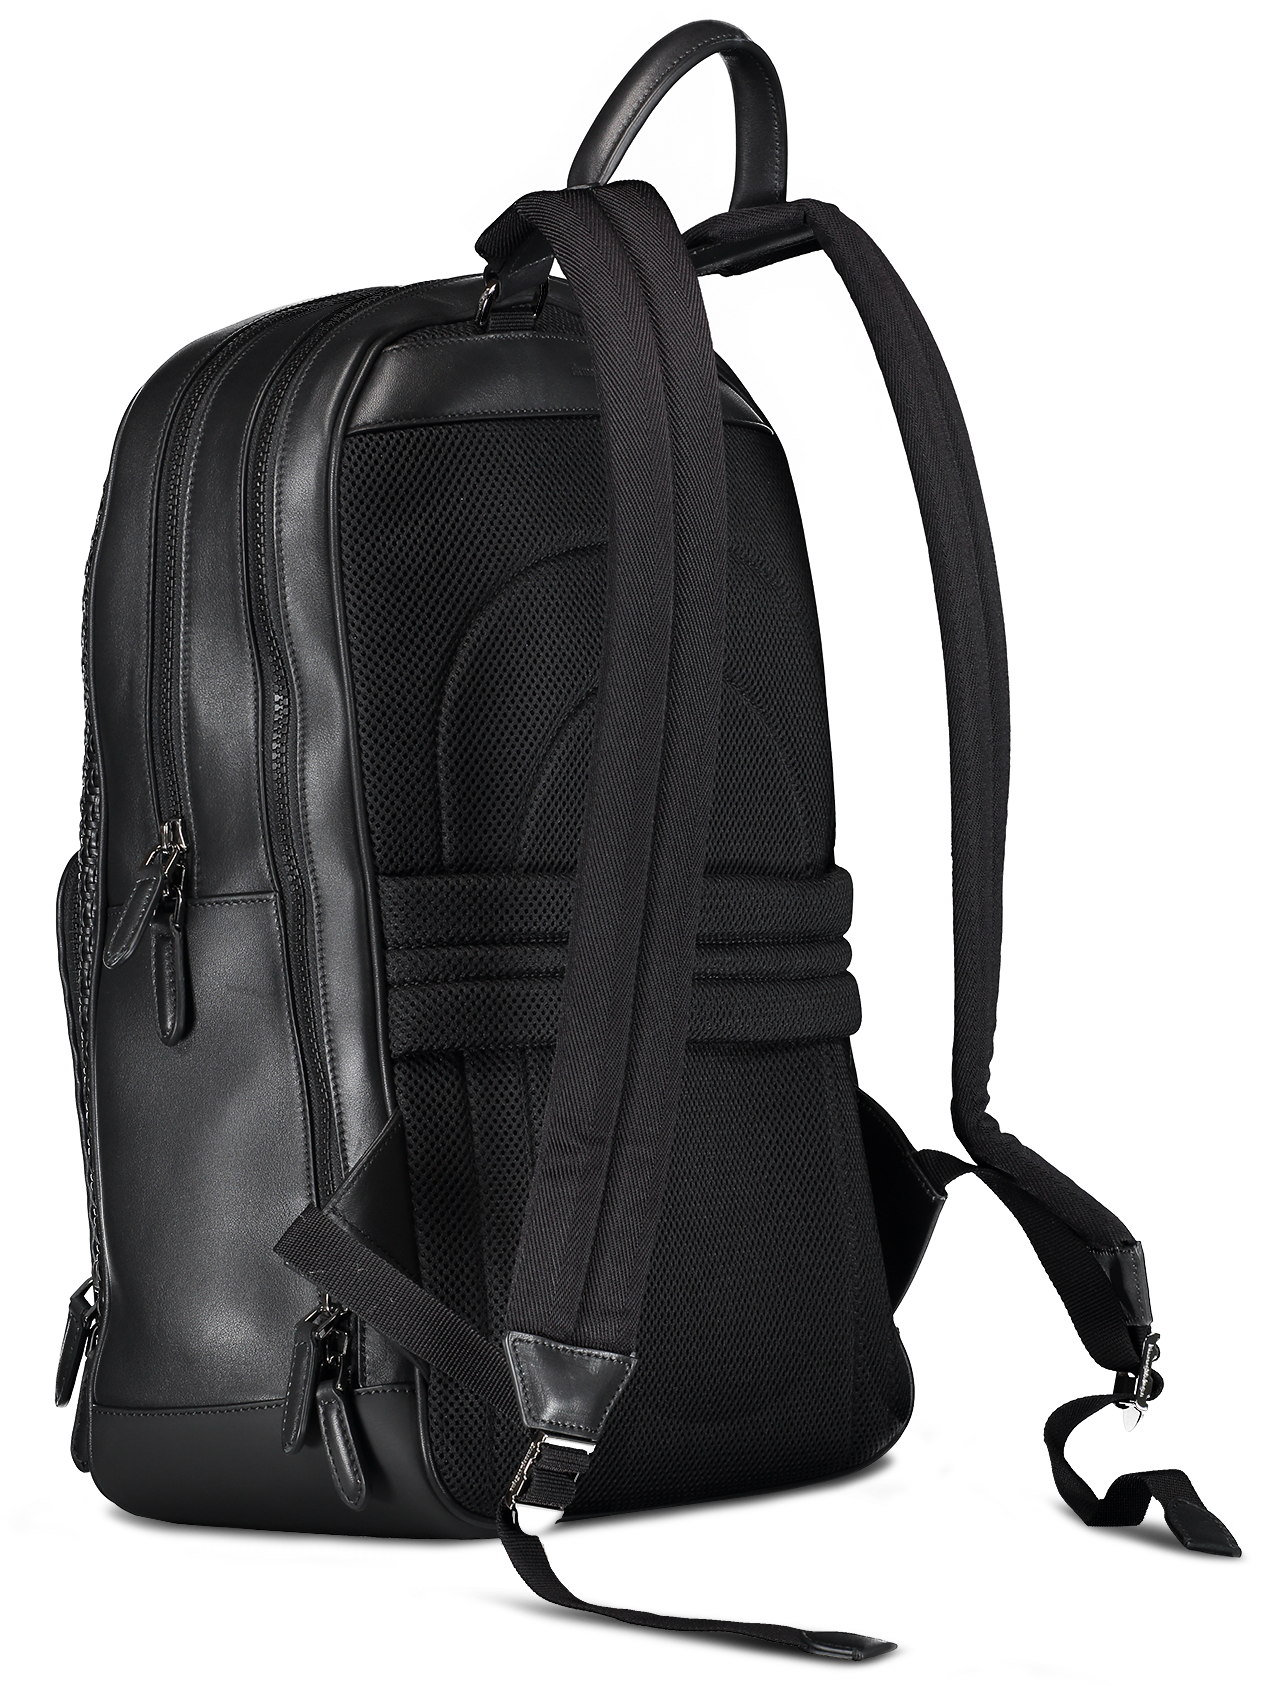 Business Backpack PNG Pic | PNG Arts